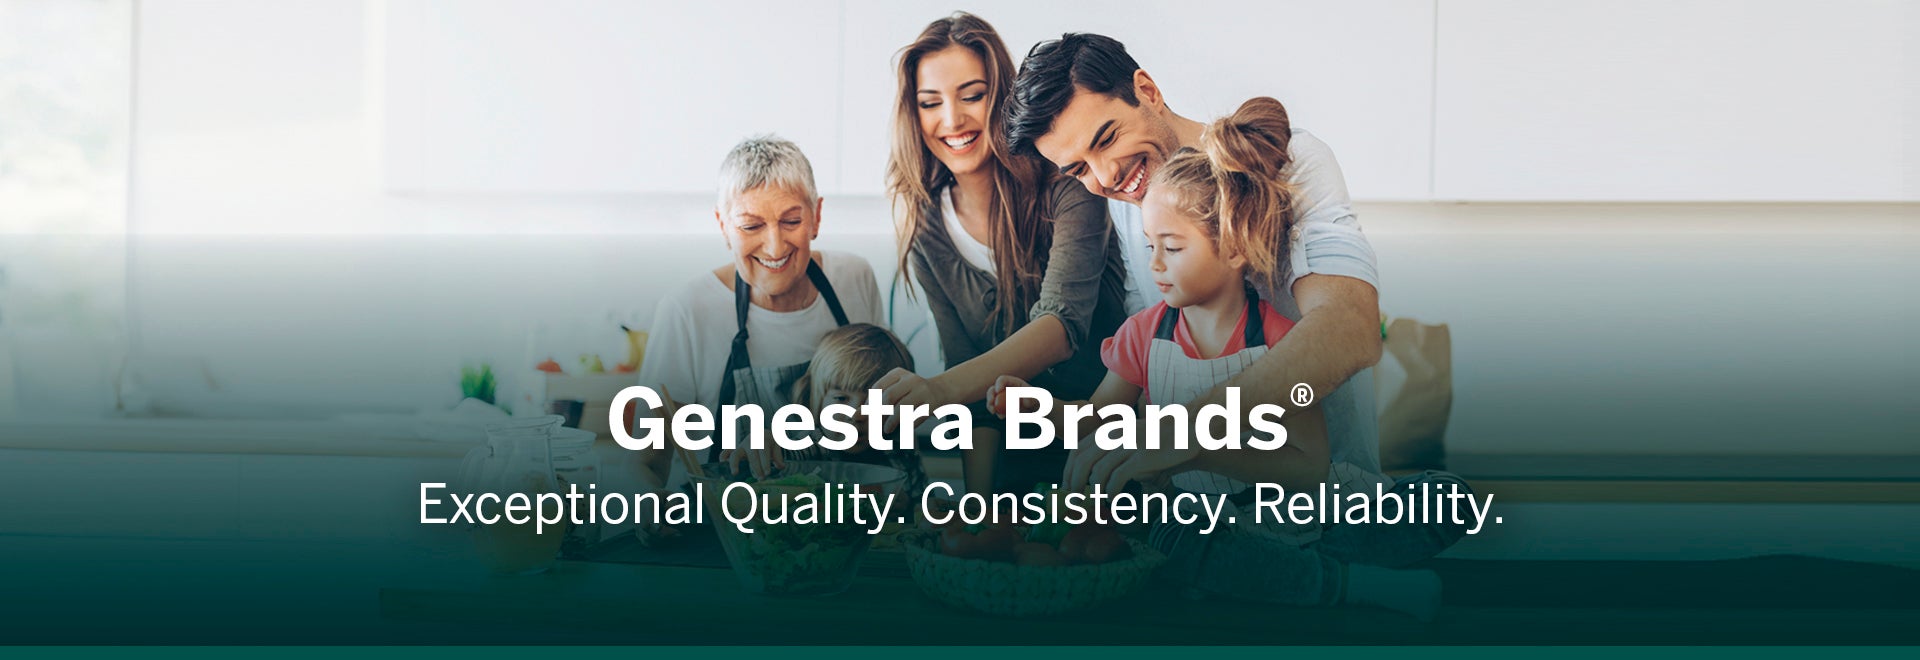 Genestra Brands(R) provides exceptional quality, consistency and reliability. A family cooking in kitchen together.